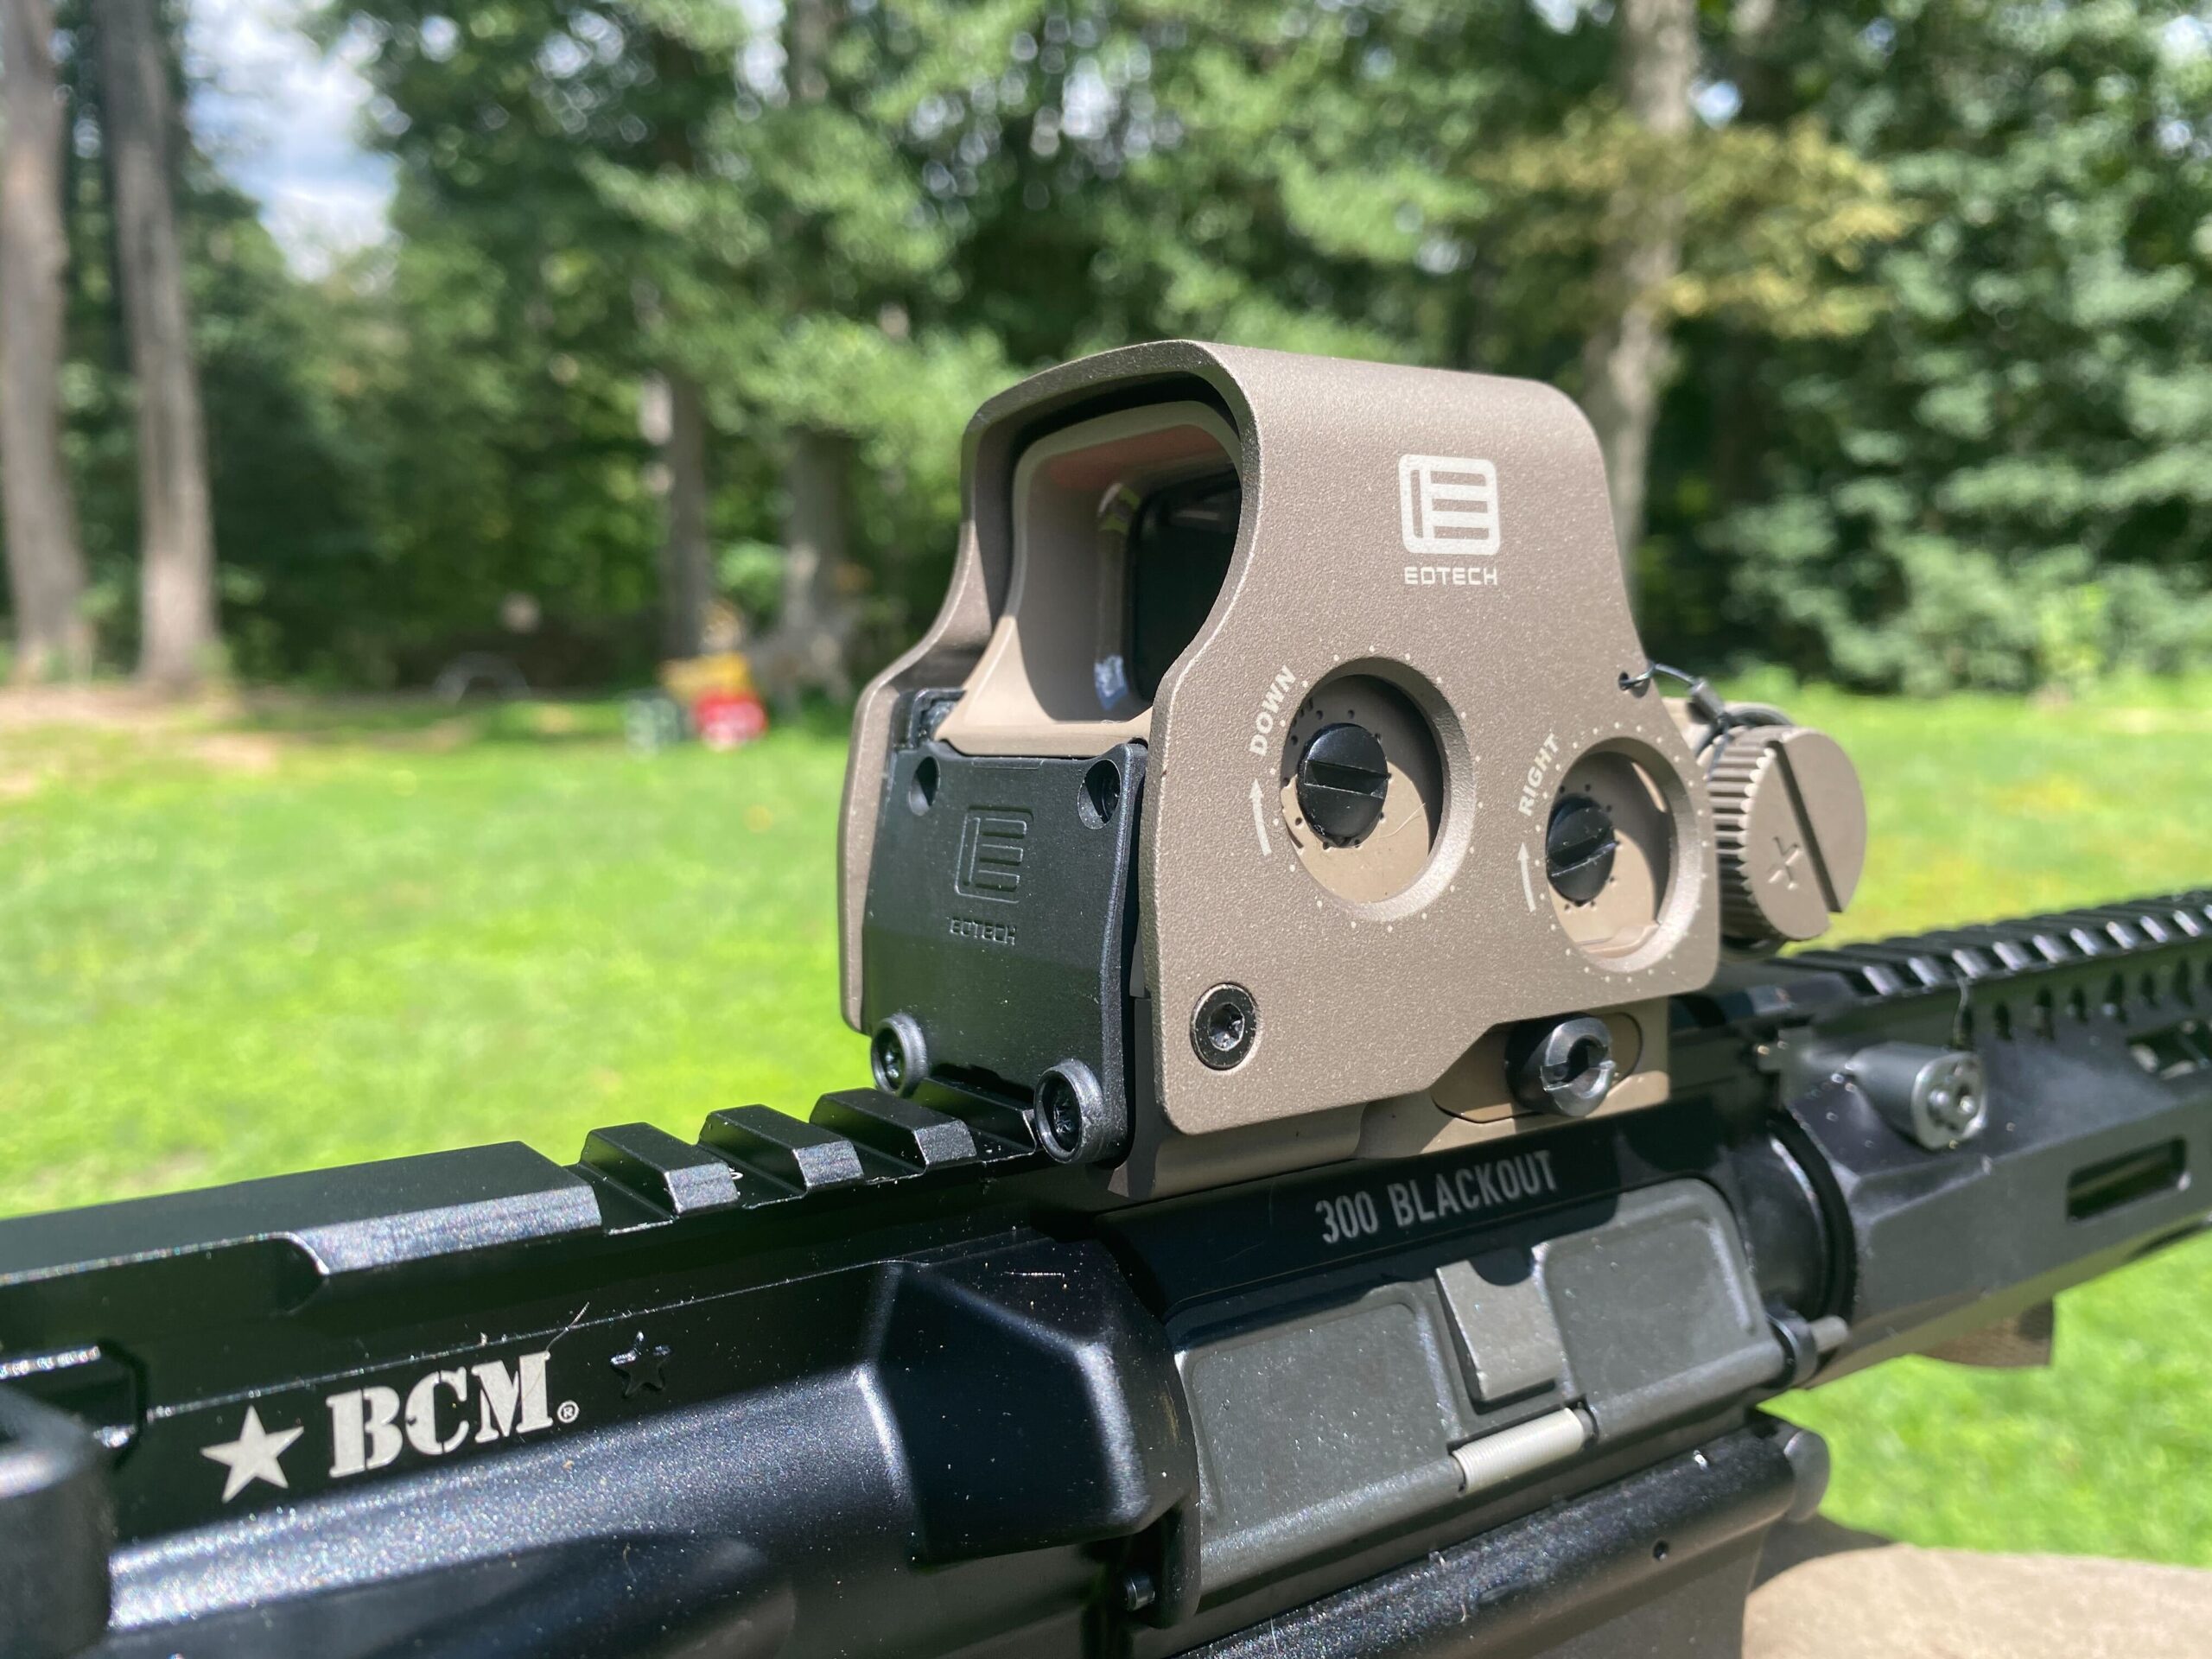 EOTECH EXPS3 holographic sight